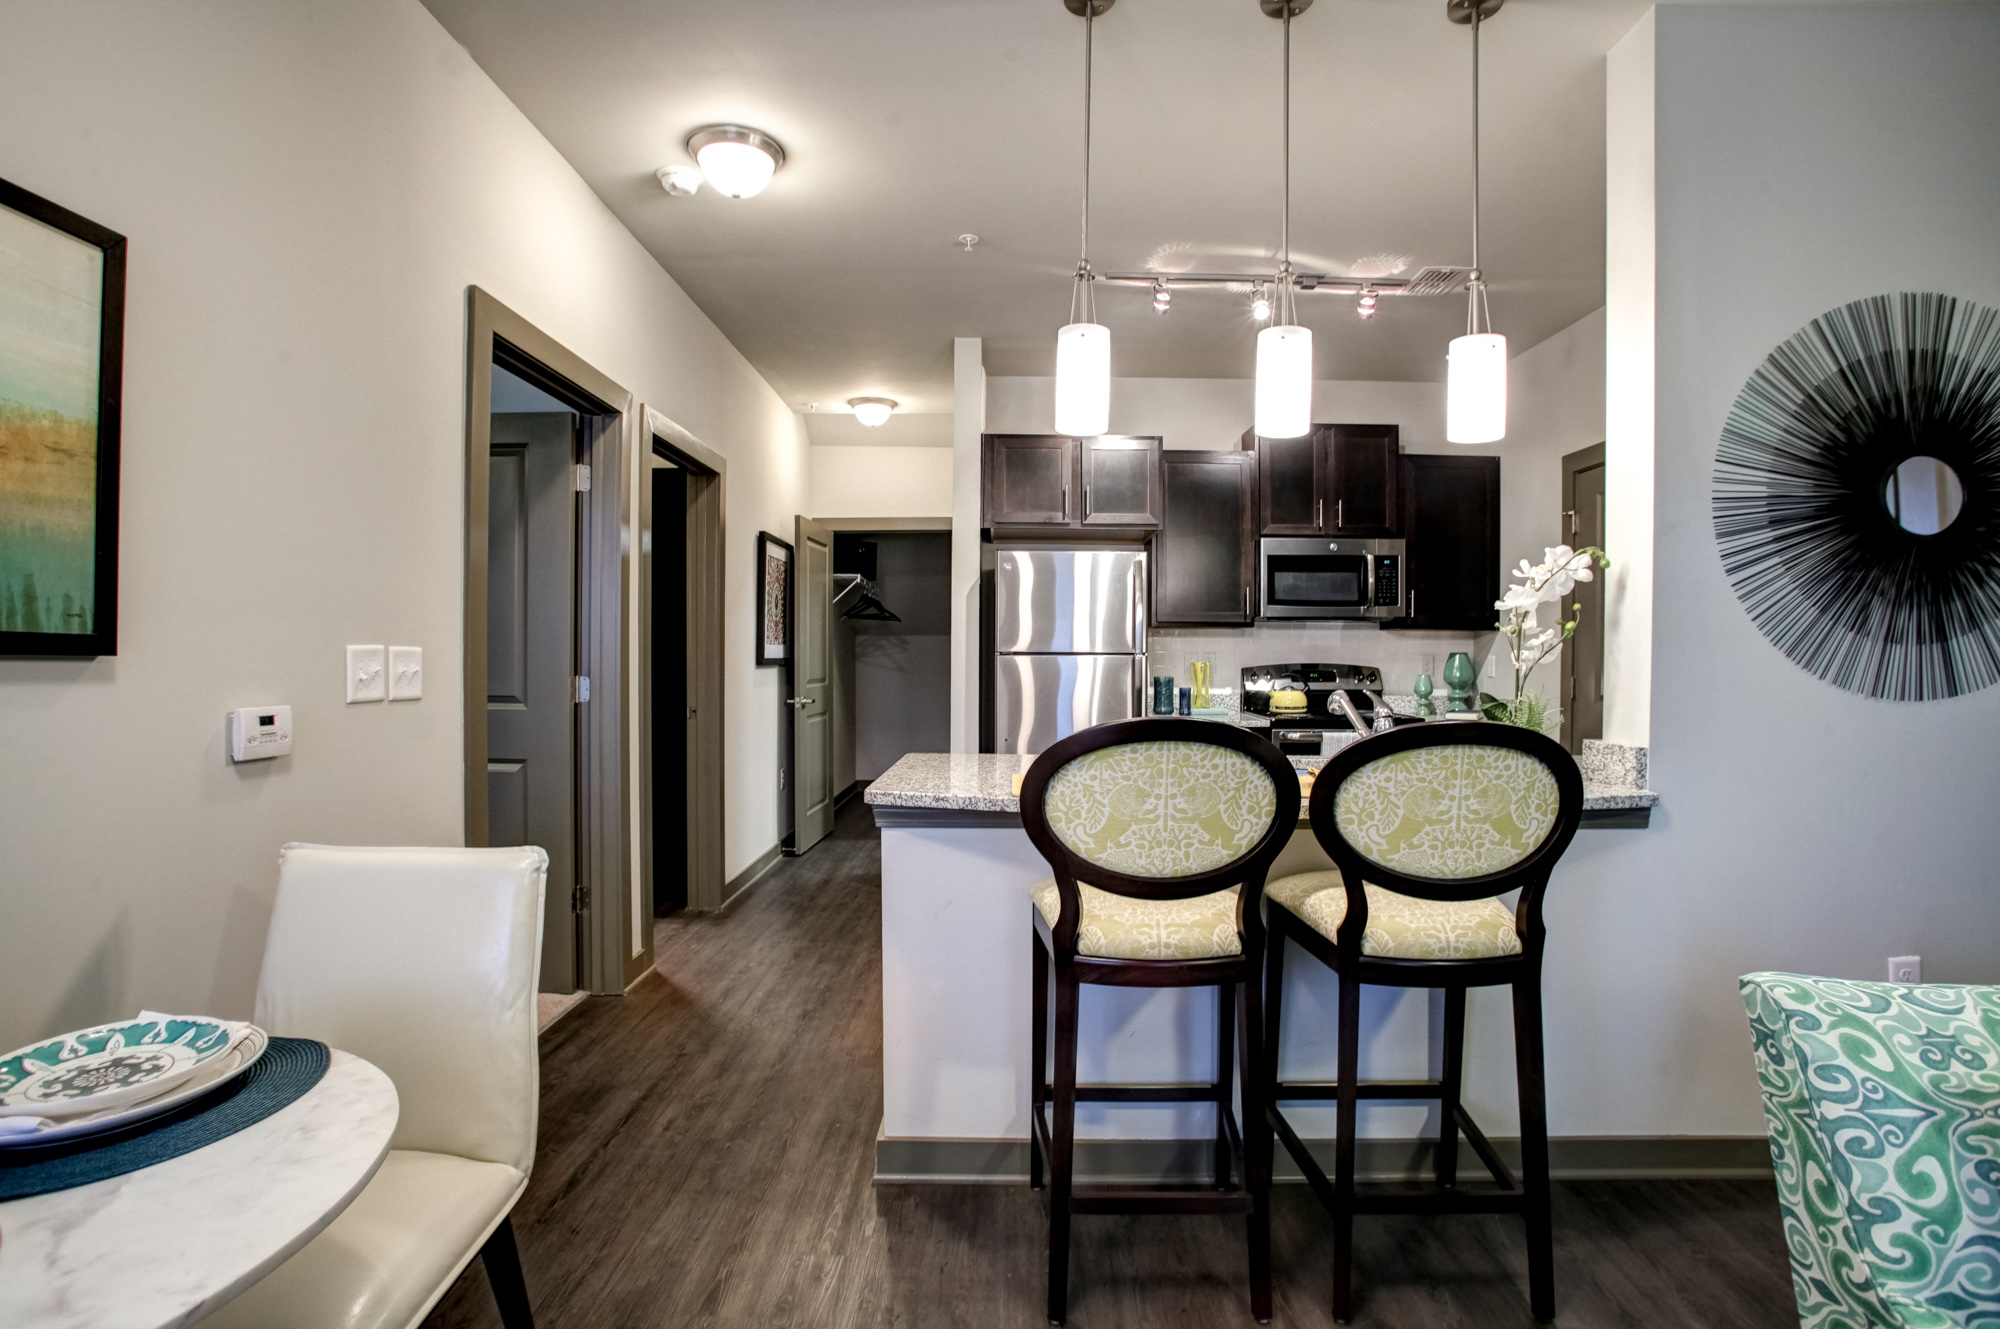 Two bar stools sit across from a kitchen with pendant lighting and stainless steel appliances.